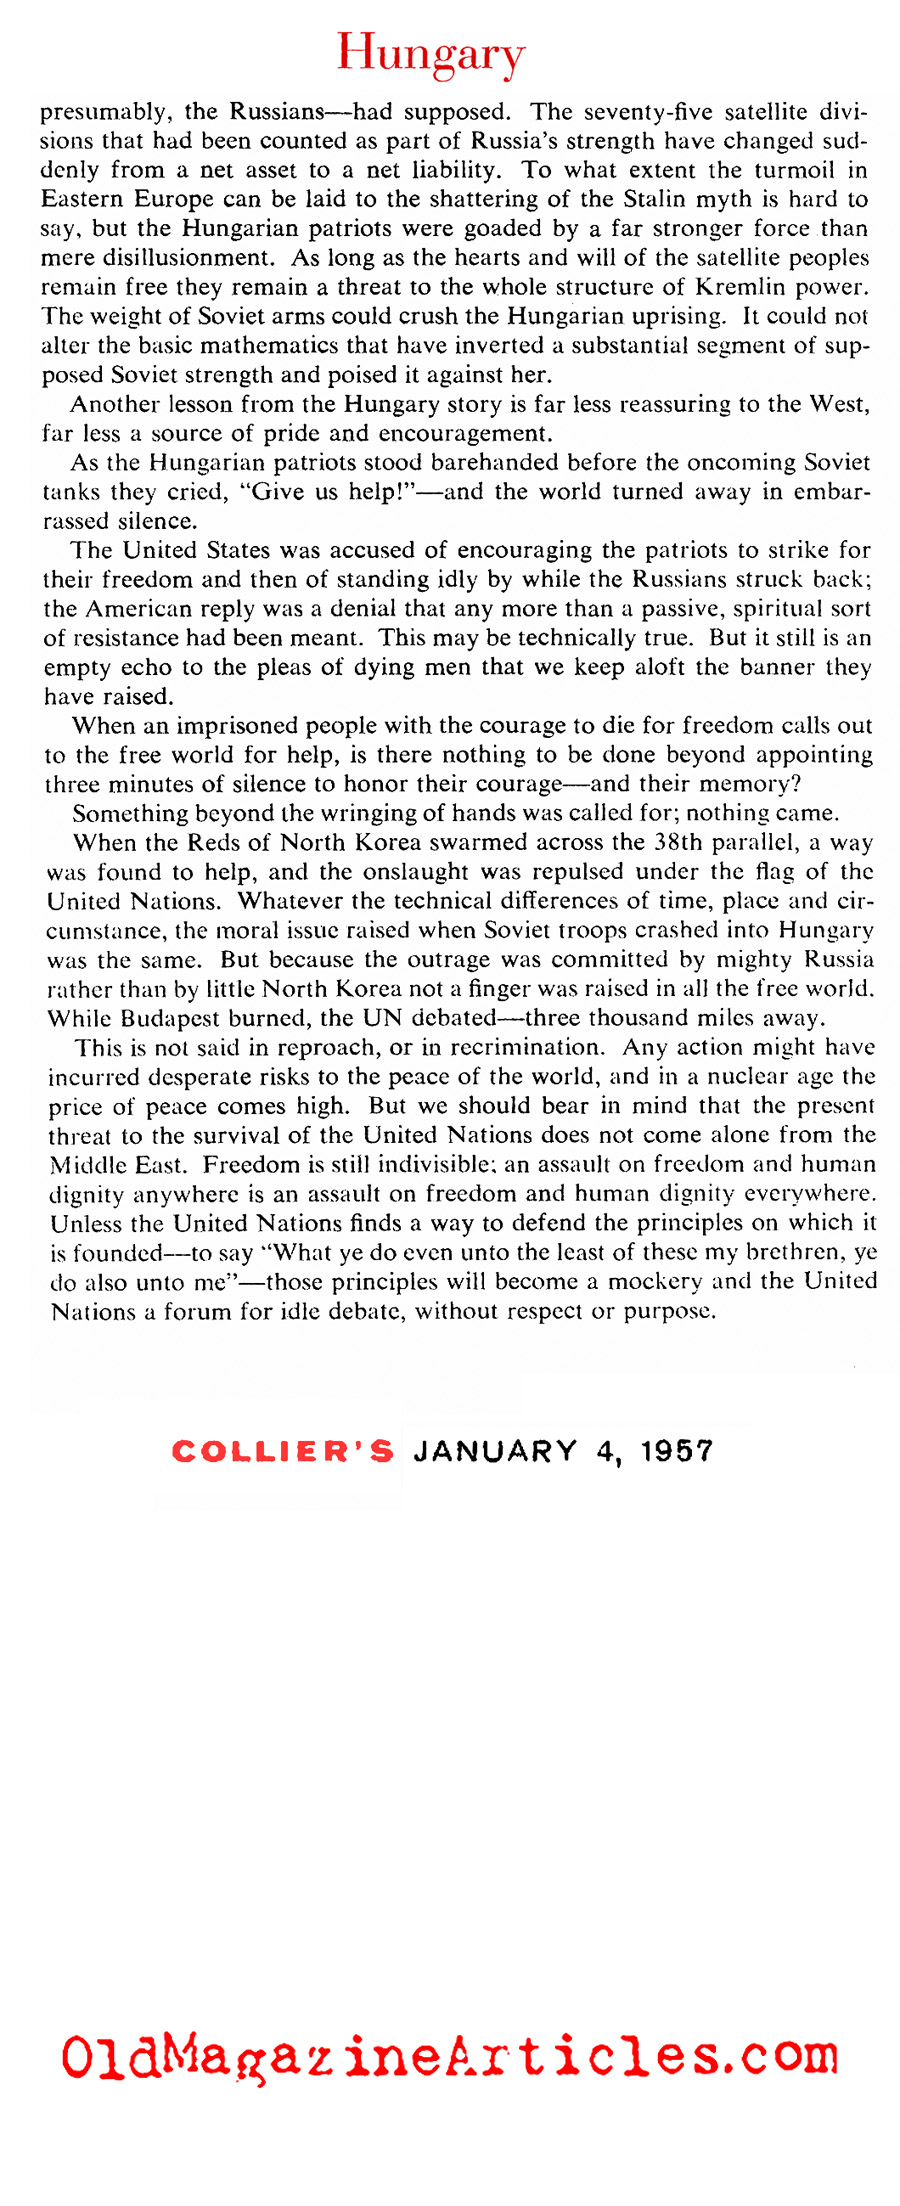 The Hungarian Uprising of 1956 (Collier's Magazine, 1957)